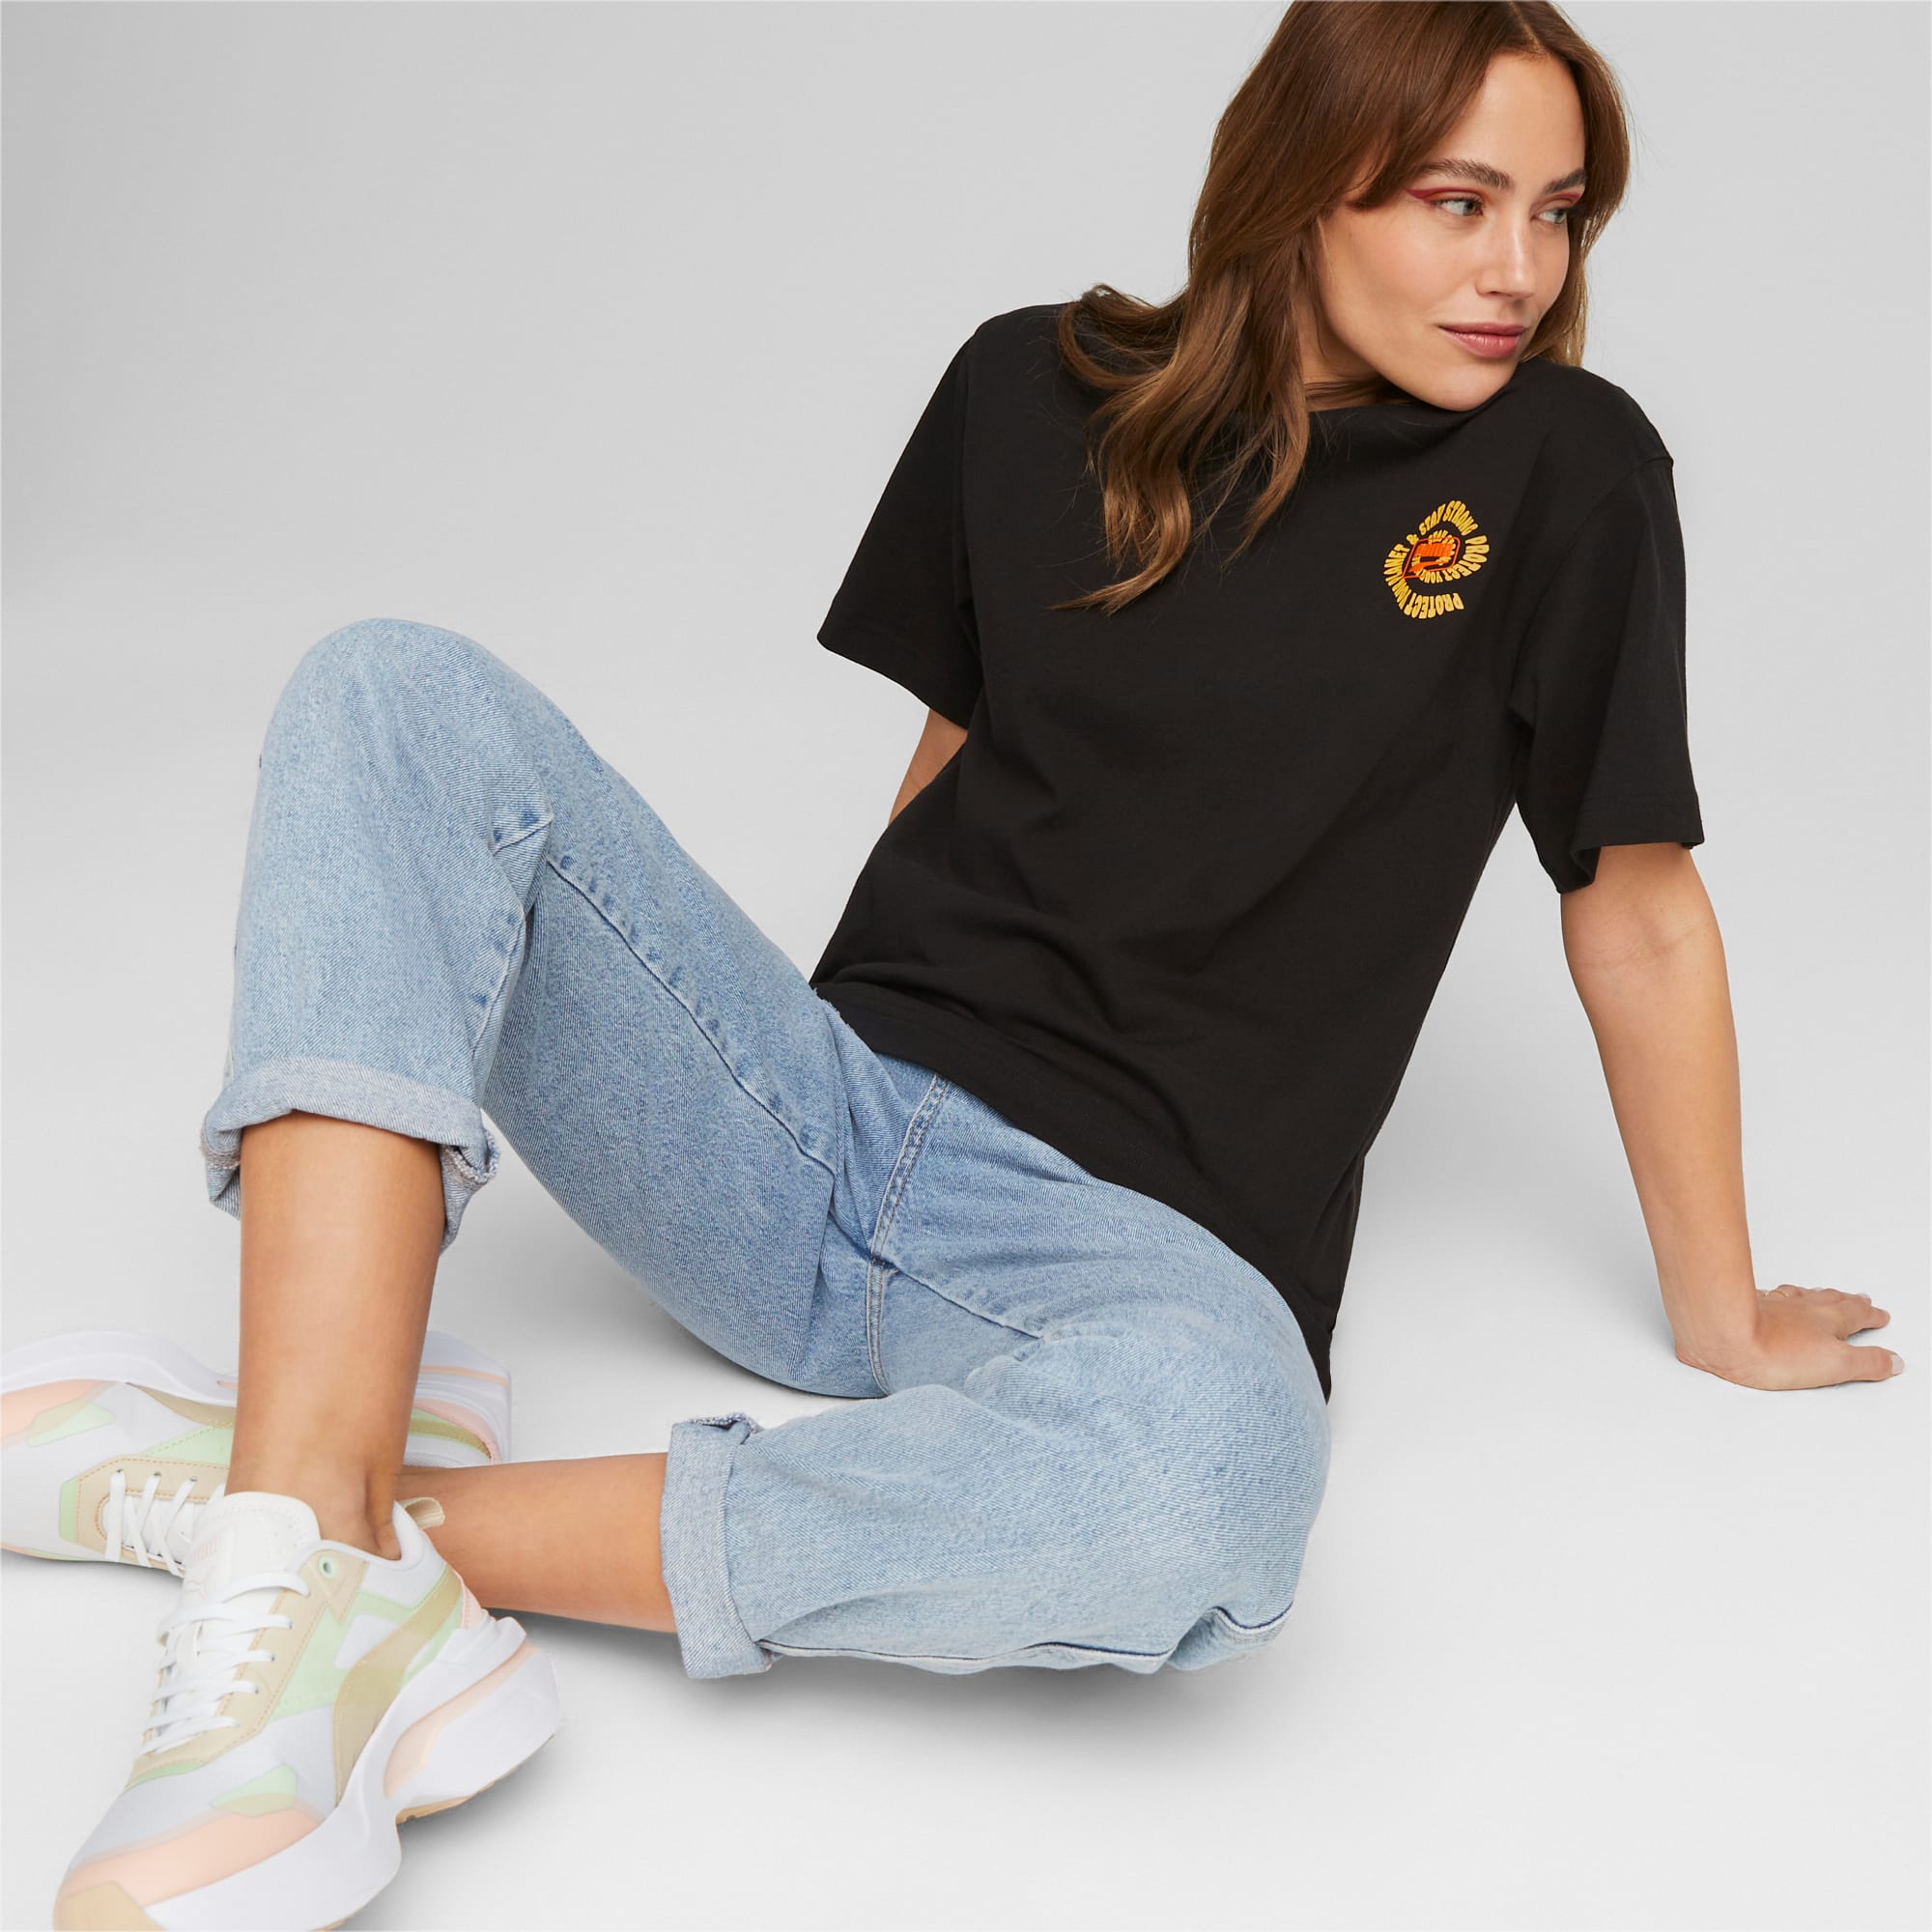 Downtown Relaxed Women's Graphic Tee | PUMA